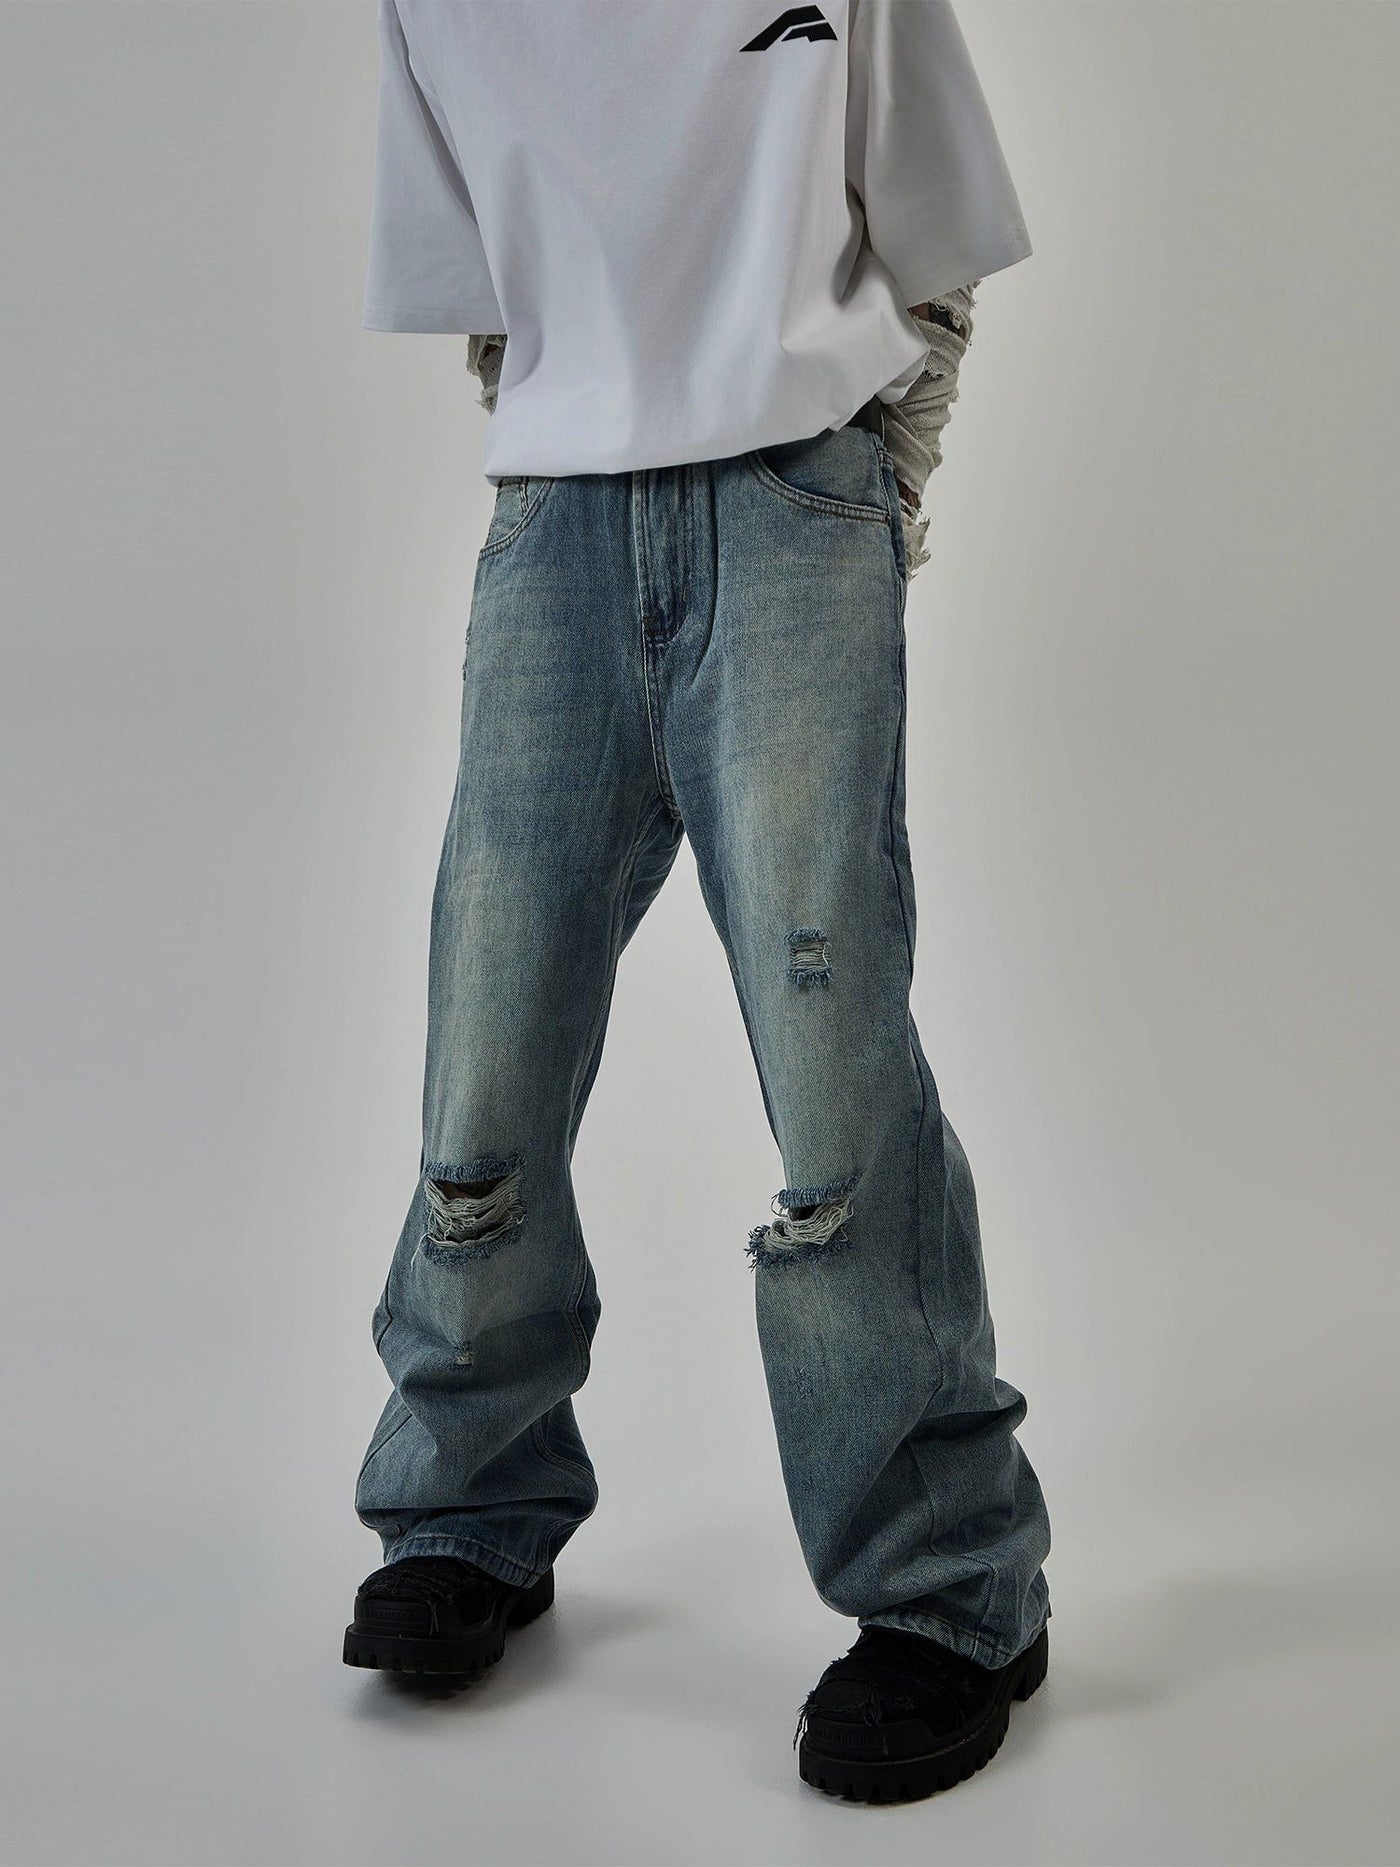 Knee Holes Flared Jeans Korean Street Fashion Jeans By Ash Dark Shop Online at OH Vault